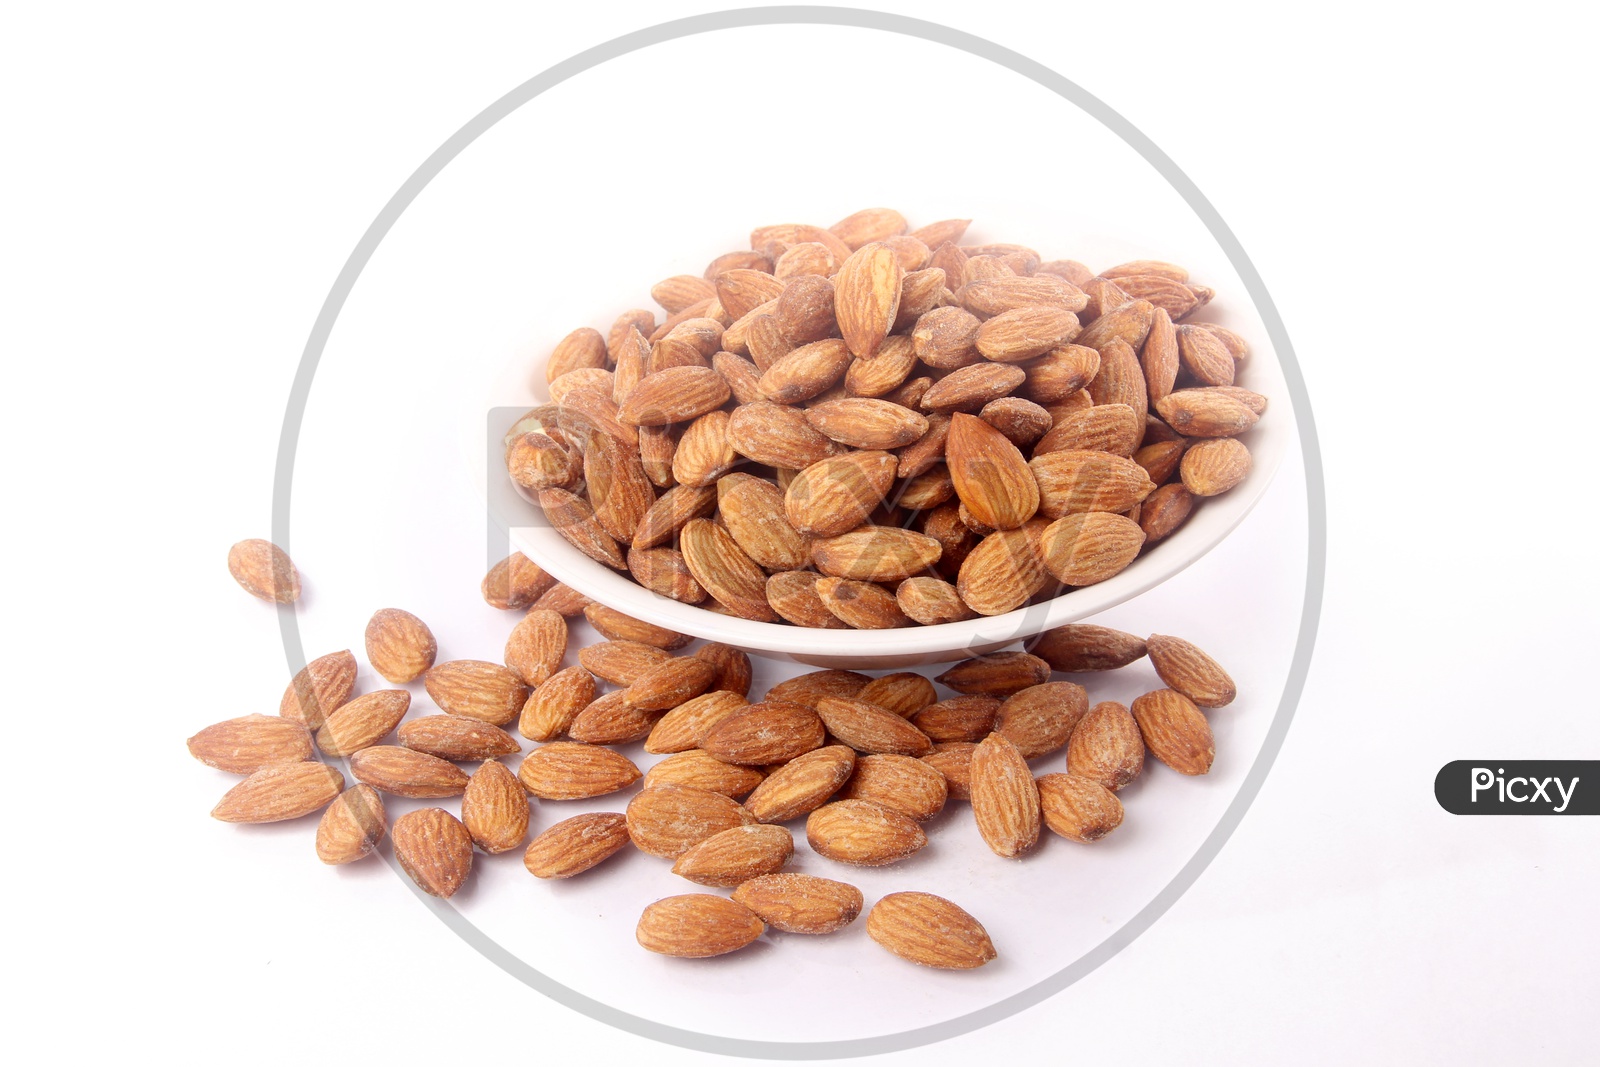 Roasted Almond Or Badam Nuts In a  Bowl On an Isolated White Background